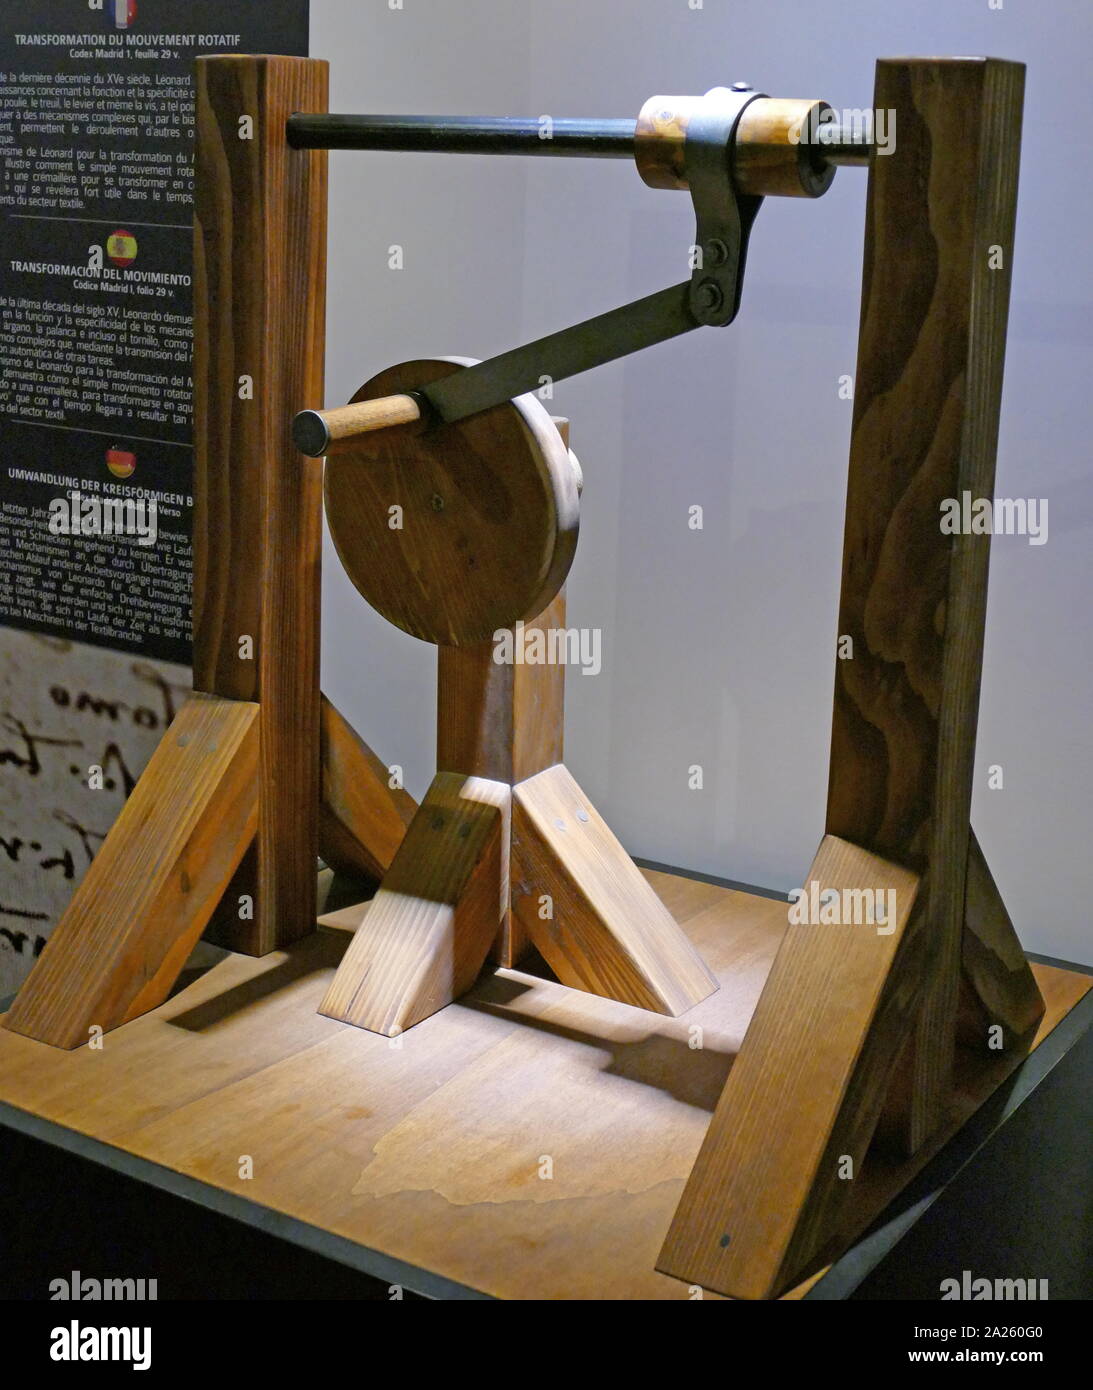 model of Leonardo Da Vinci's mechanism, for the transformation of Circular Motion. proved to be extremely useful, especially for machines used in the textile industry. based on a drawing by Leonardo da Vinci (1452-1519), Italian artist and polymath. Madrid Codex I, folio 29 v. Stock Photo